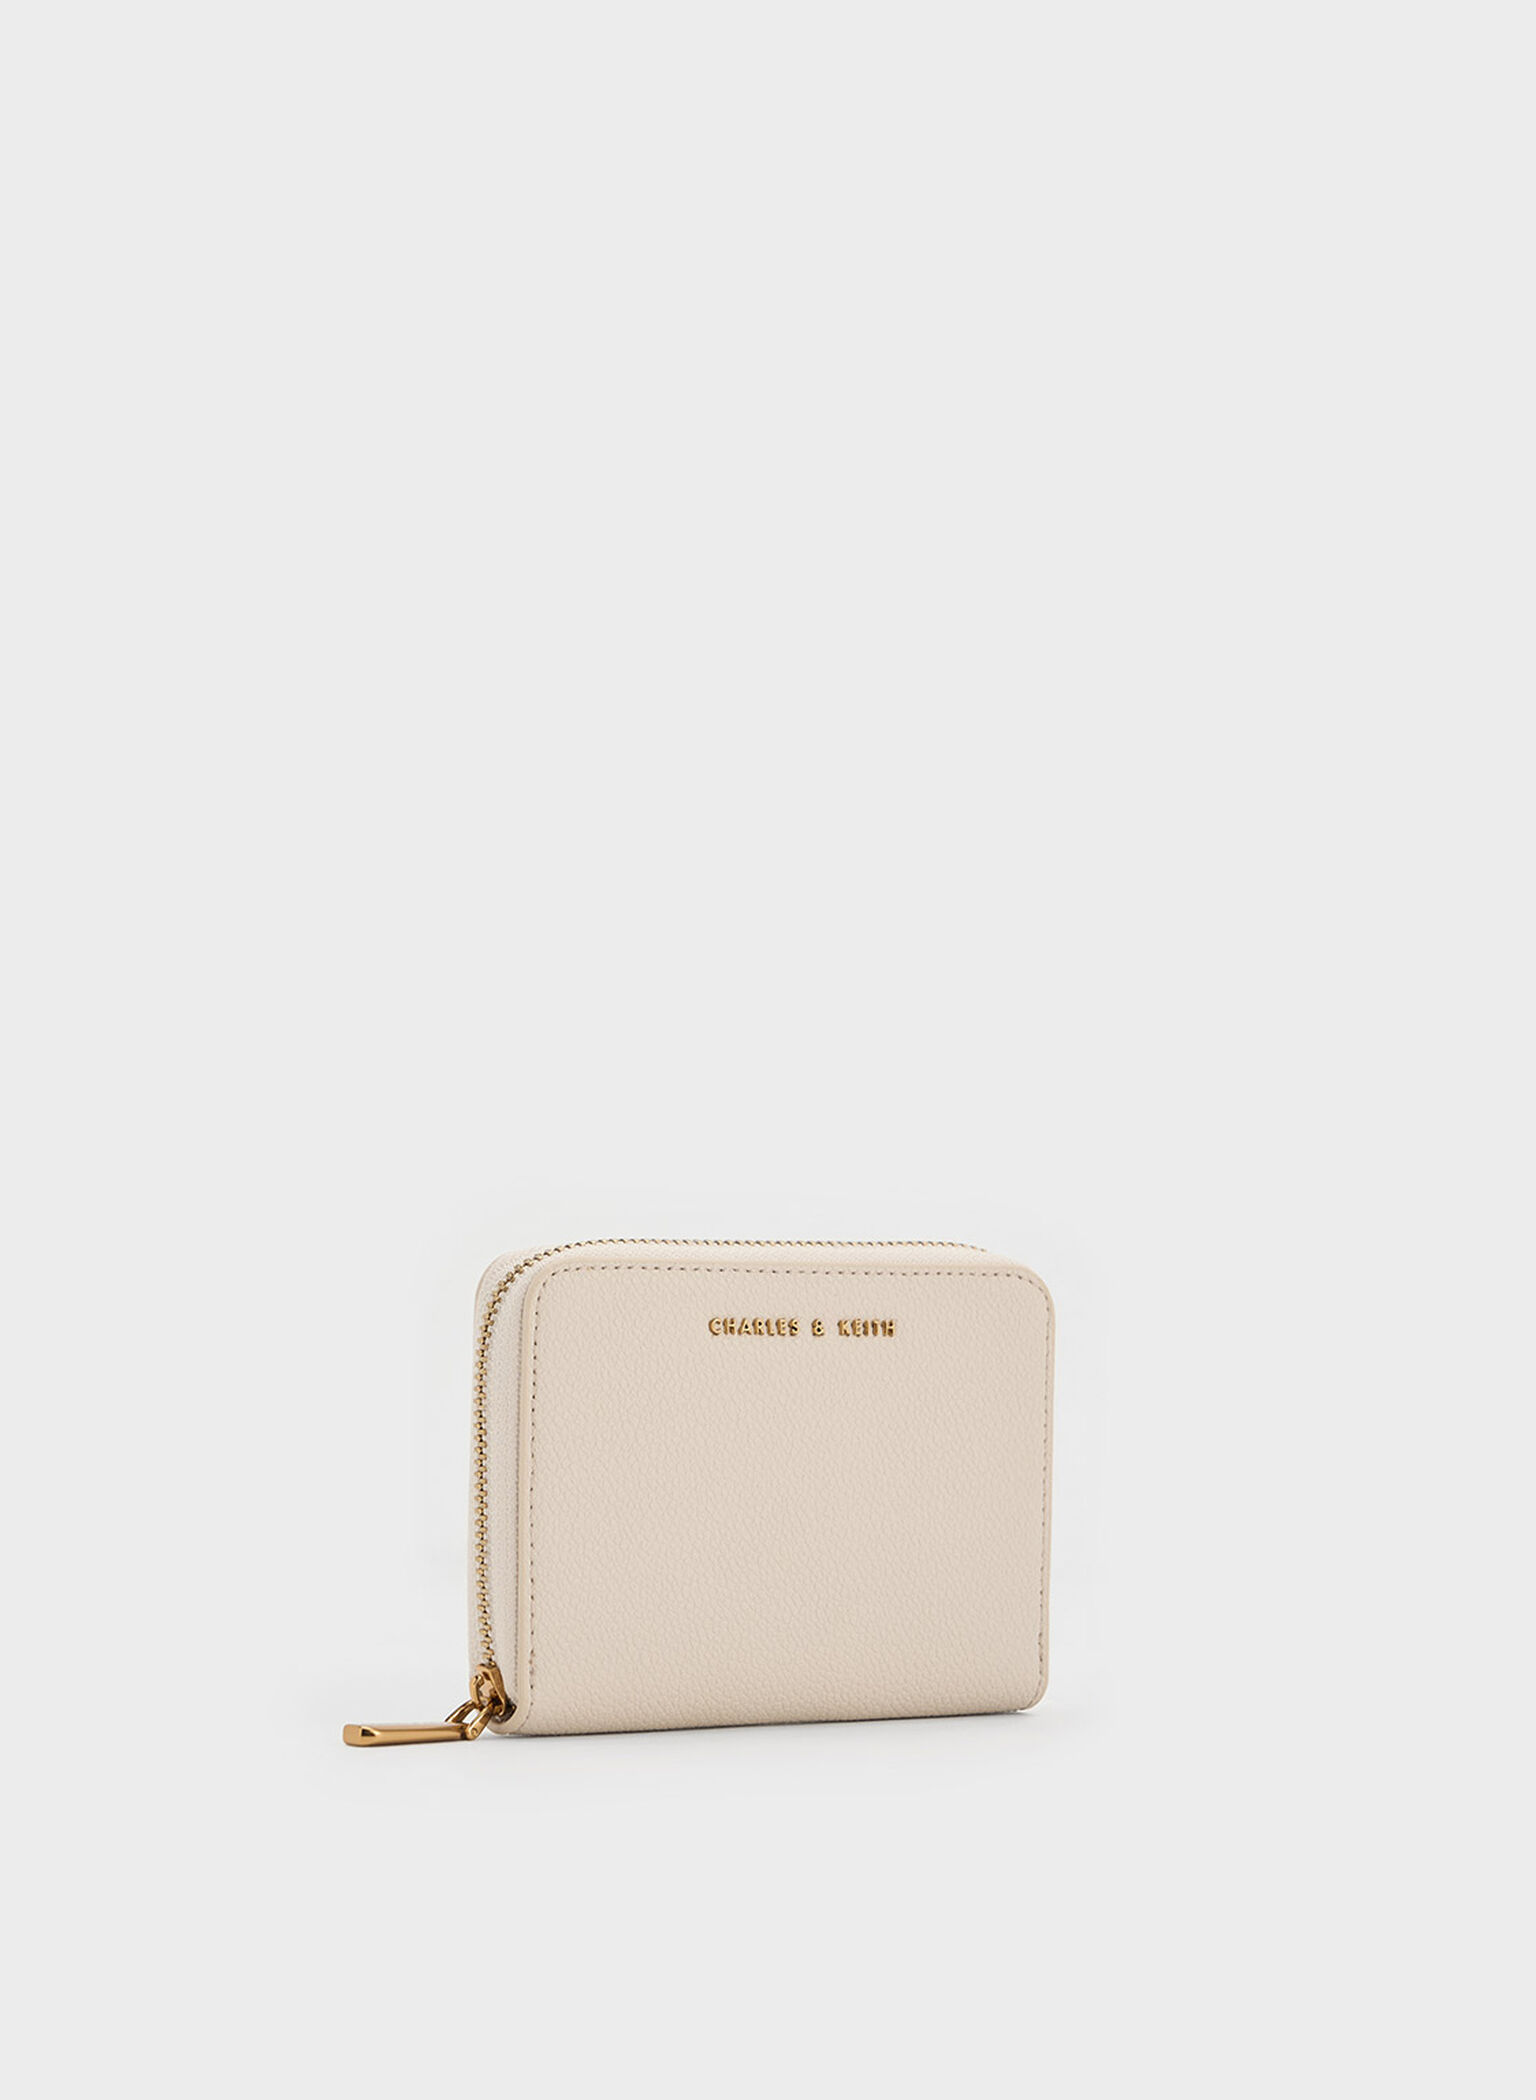 Ivory Basic Square Wallet - CHARLES & KEITH PH